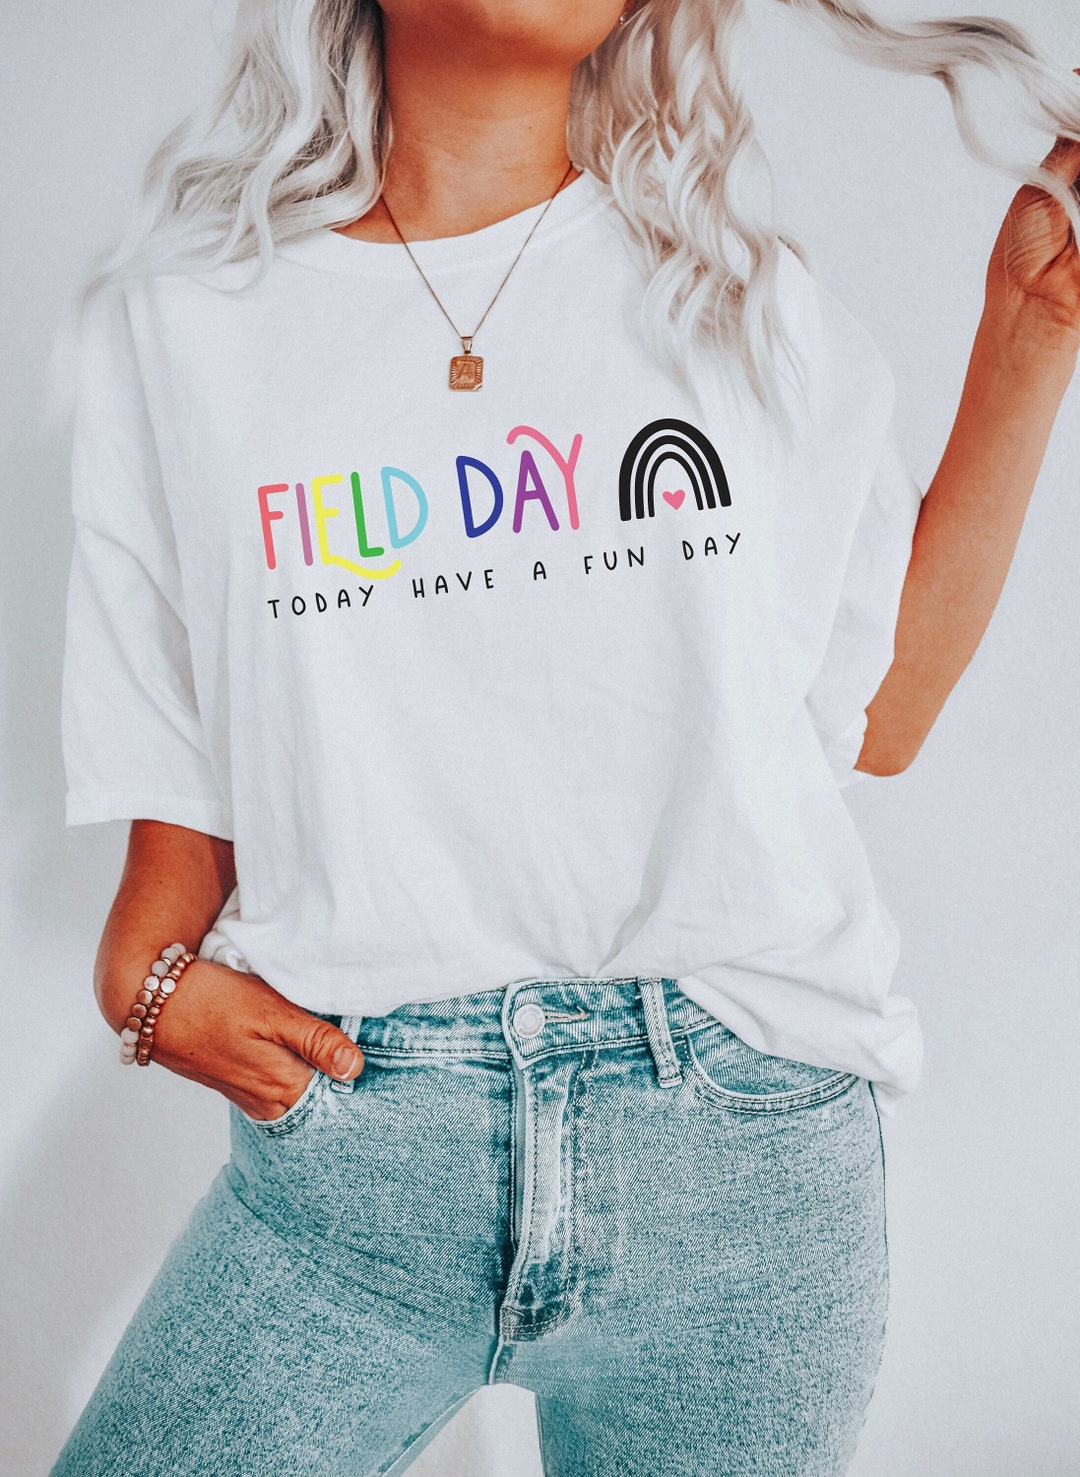 Field Day 2022 SVG Today Have a Fun Day Svg Field Day - Etsy